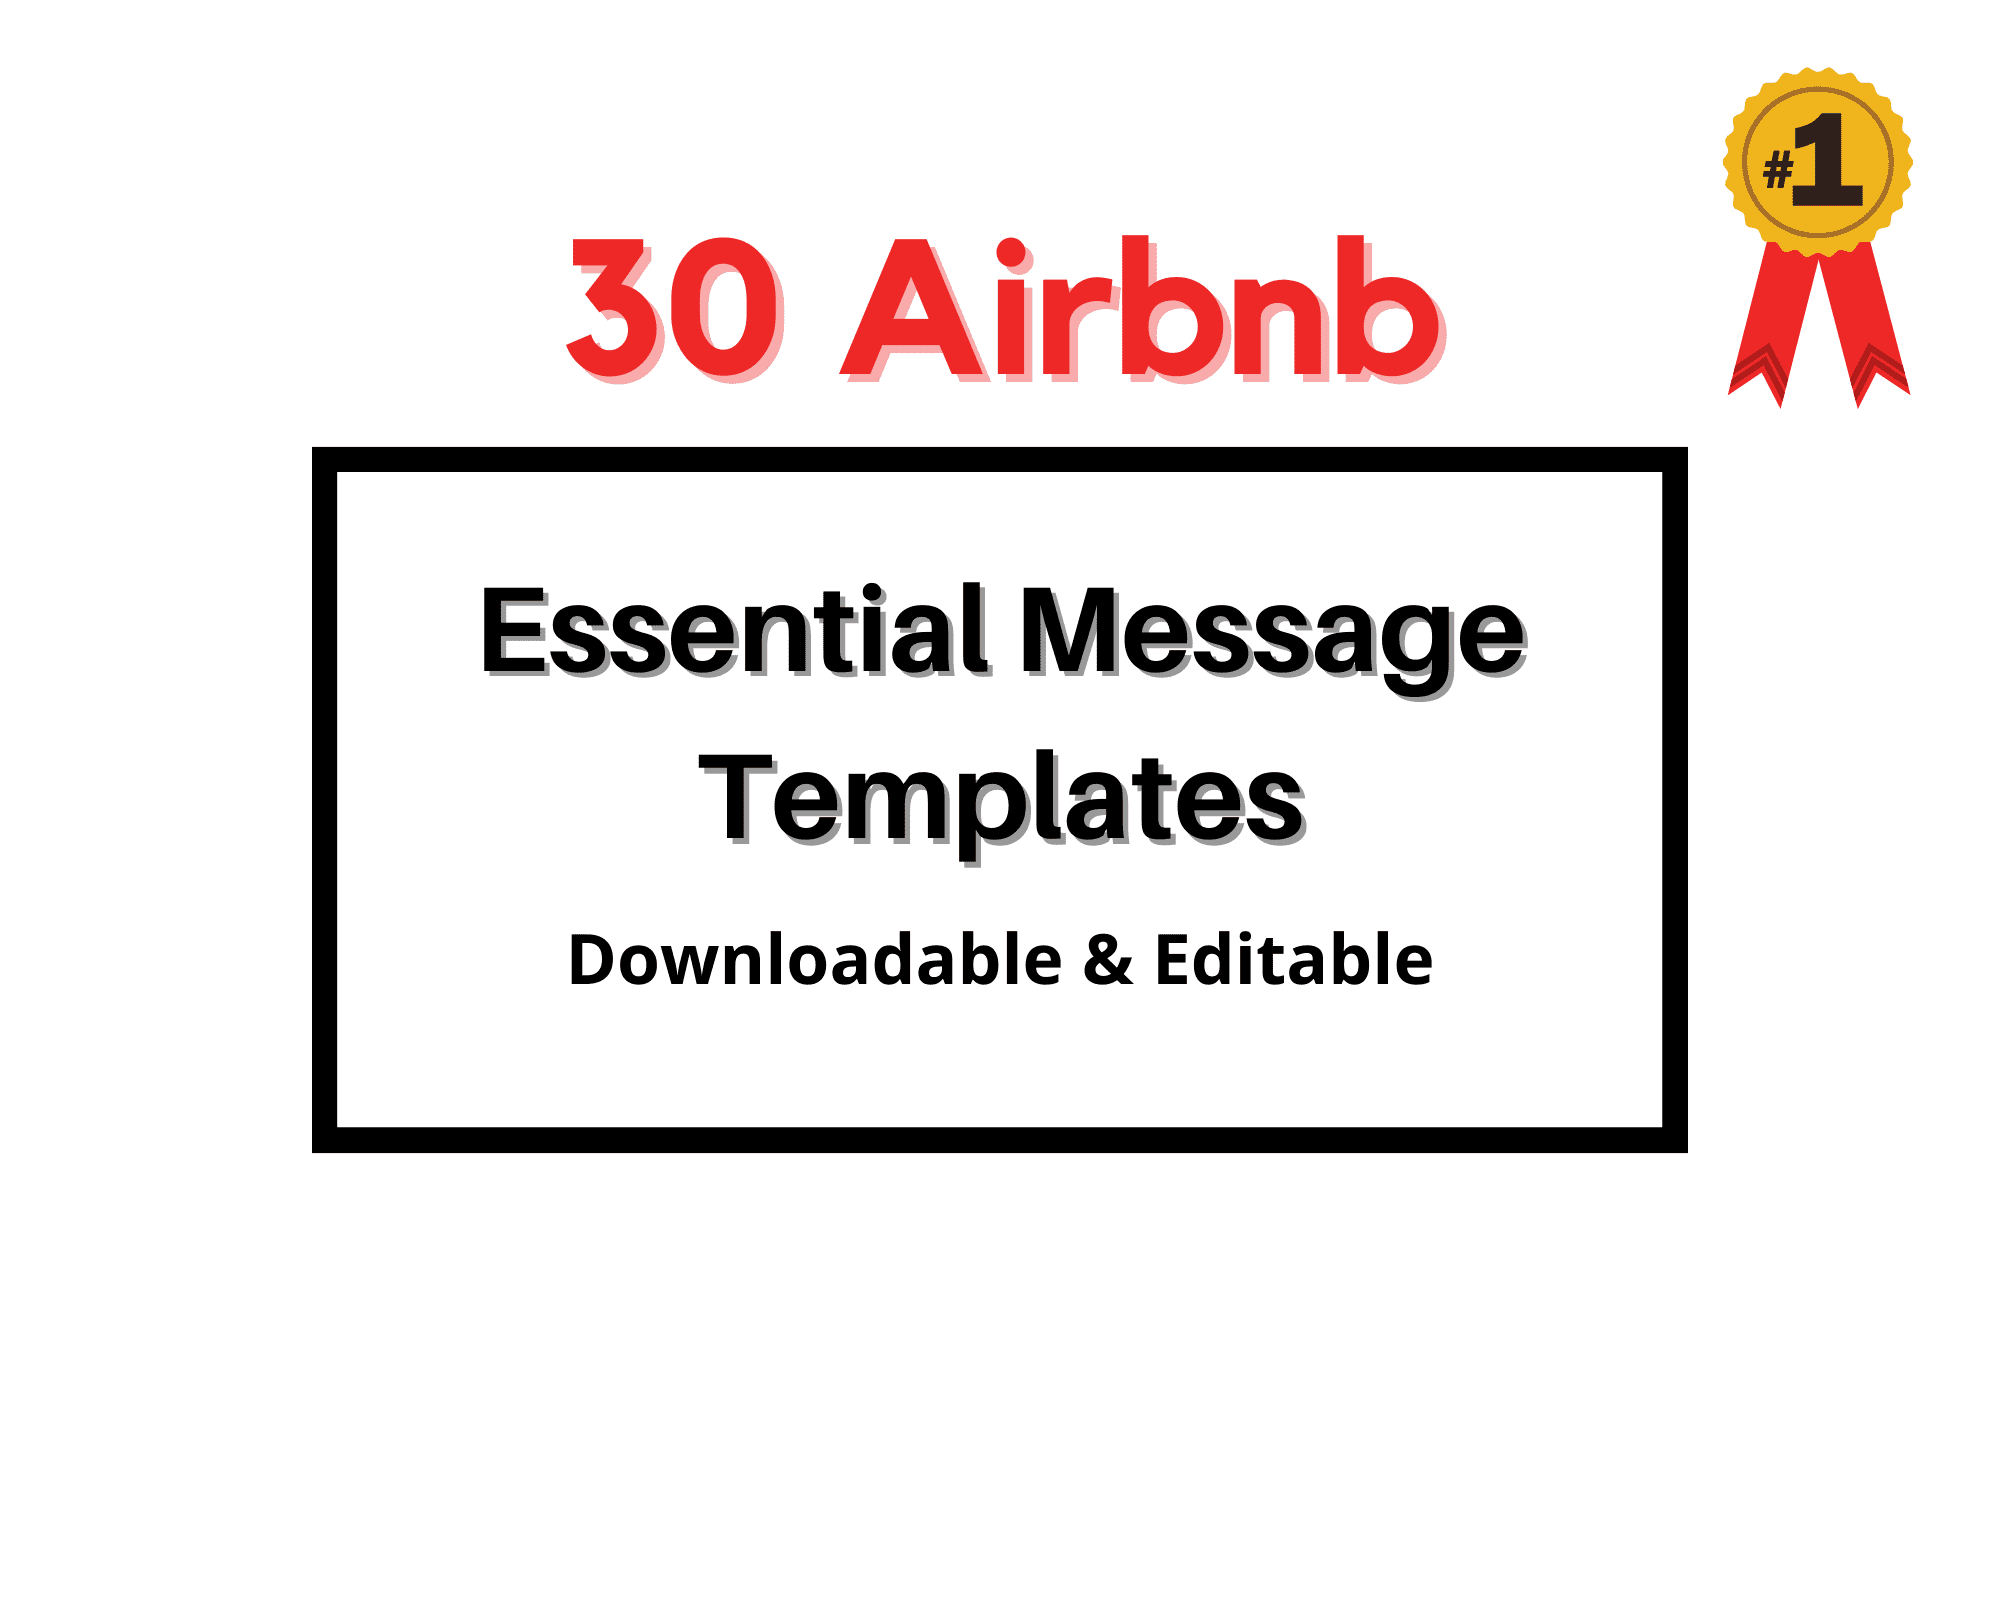 Airbnb Hosting 30 Essential Airbnb Message Templates For Hosts download and editable for airbnb hosts.